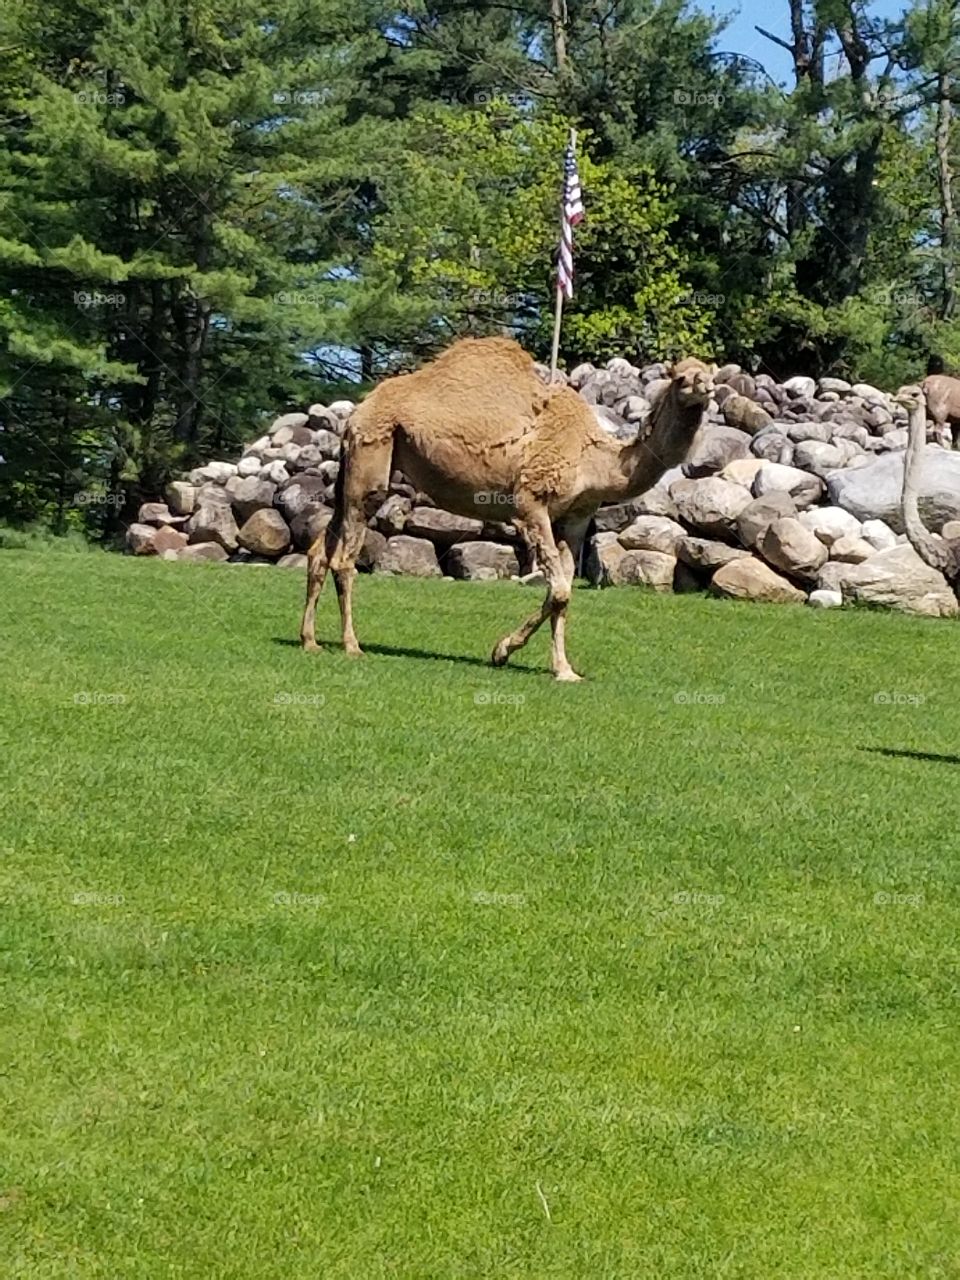 Just a camel hanging out